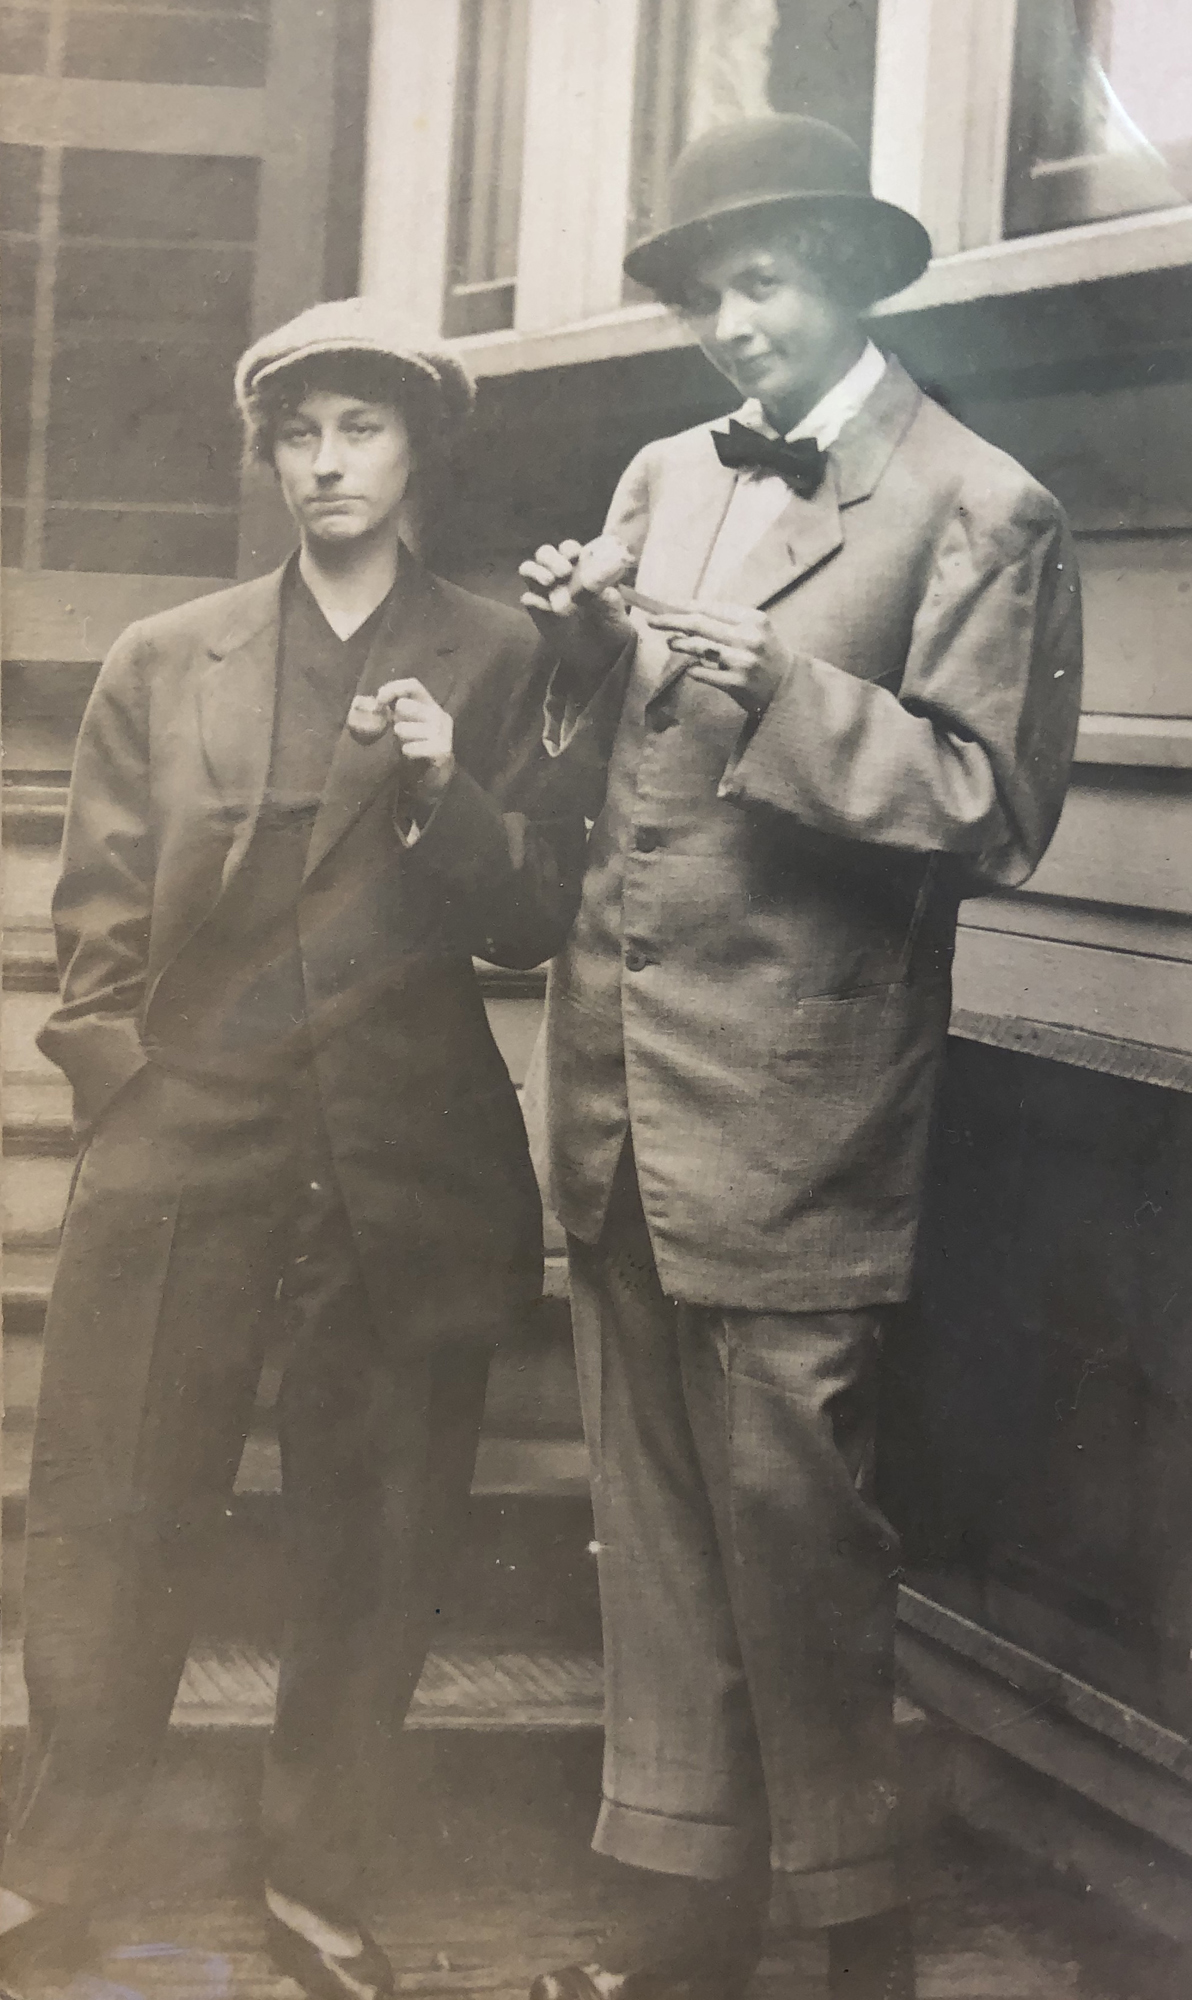 Two unidentified women dressed as men in suits. Reproduced from images in the Elizabeth West Postcard Collection, Schlesinger Library.